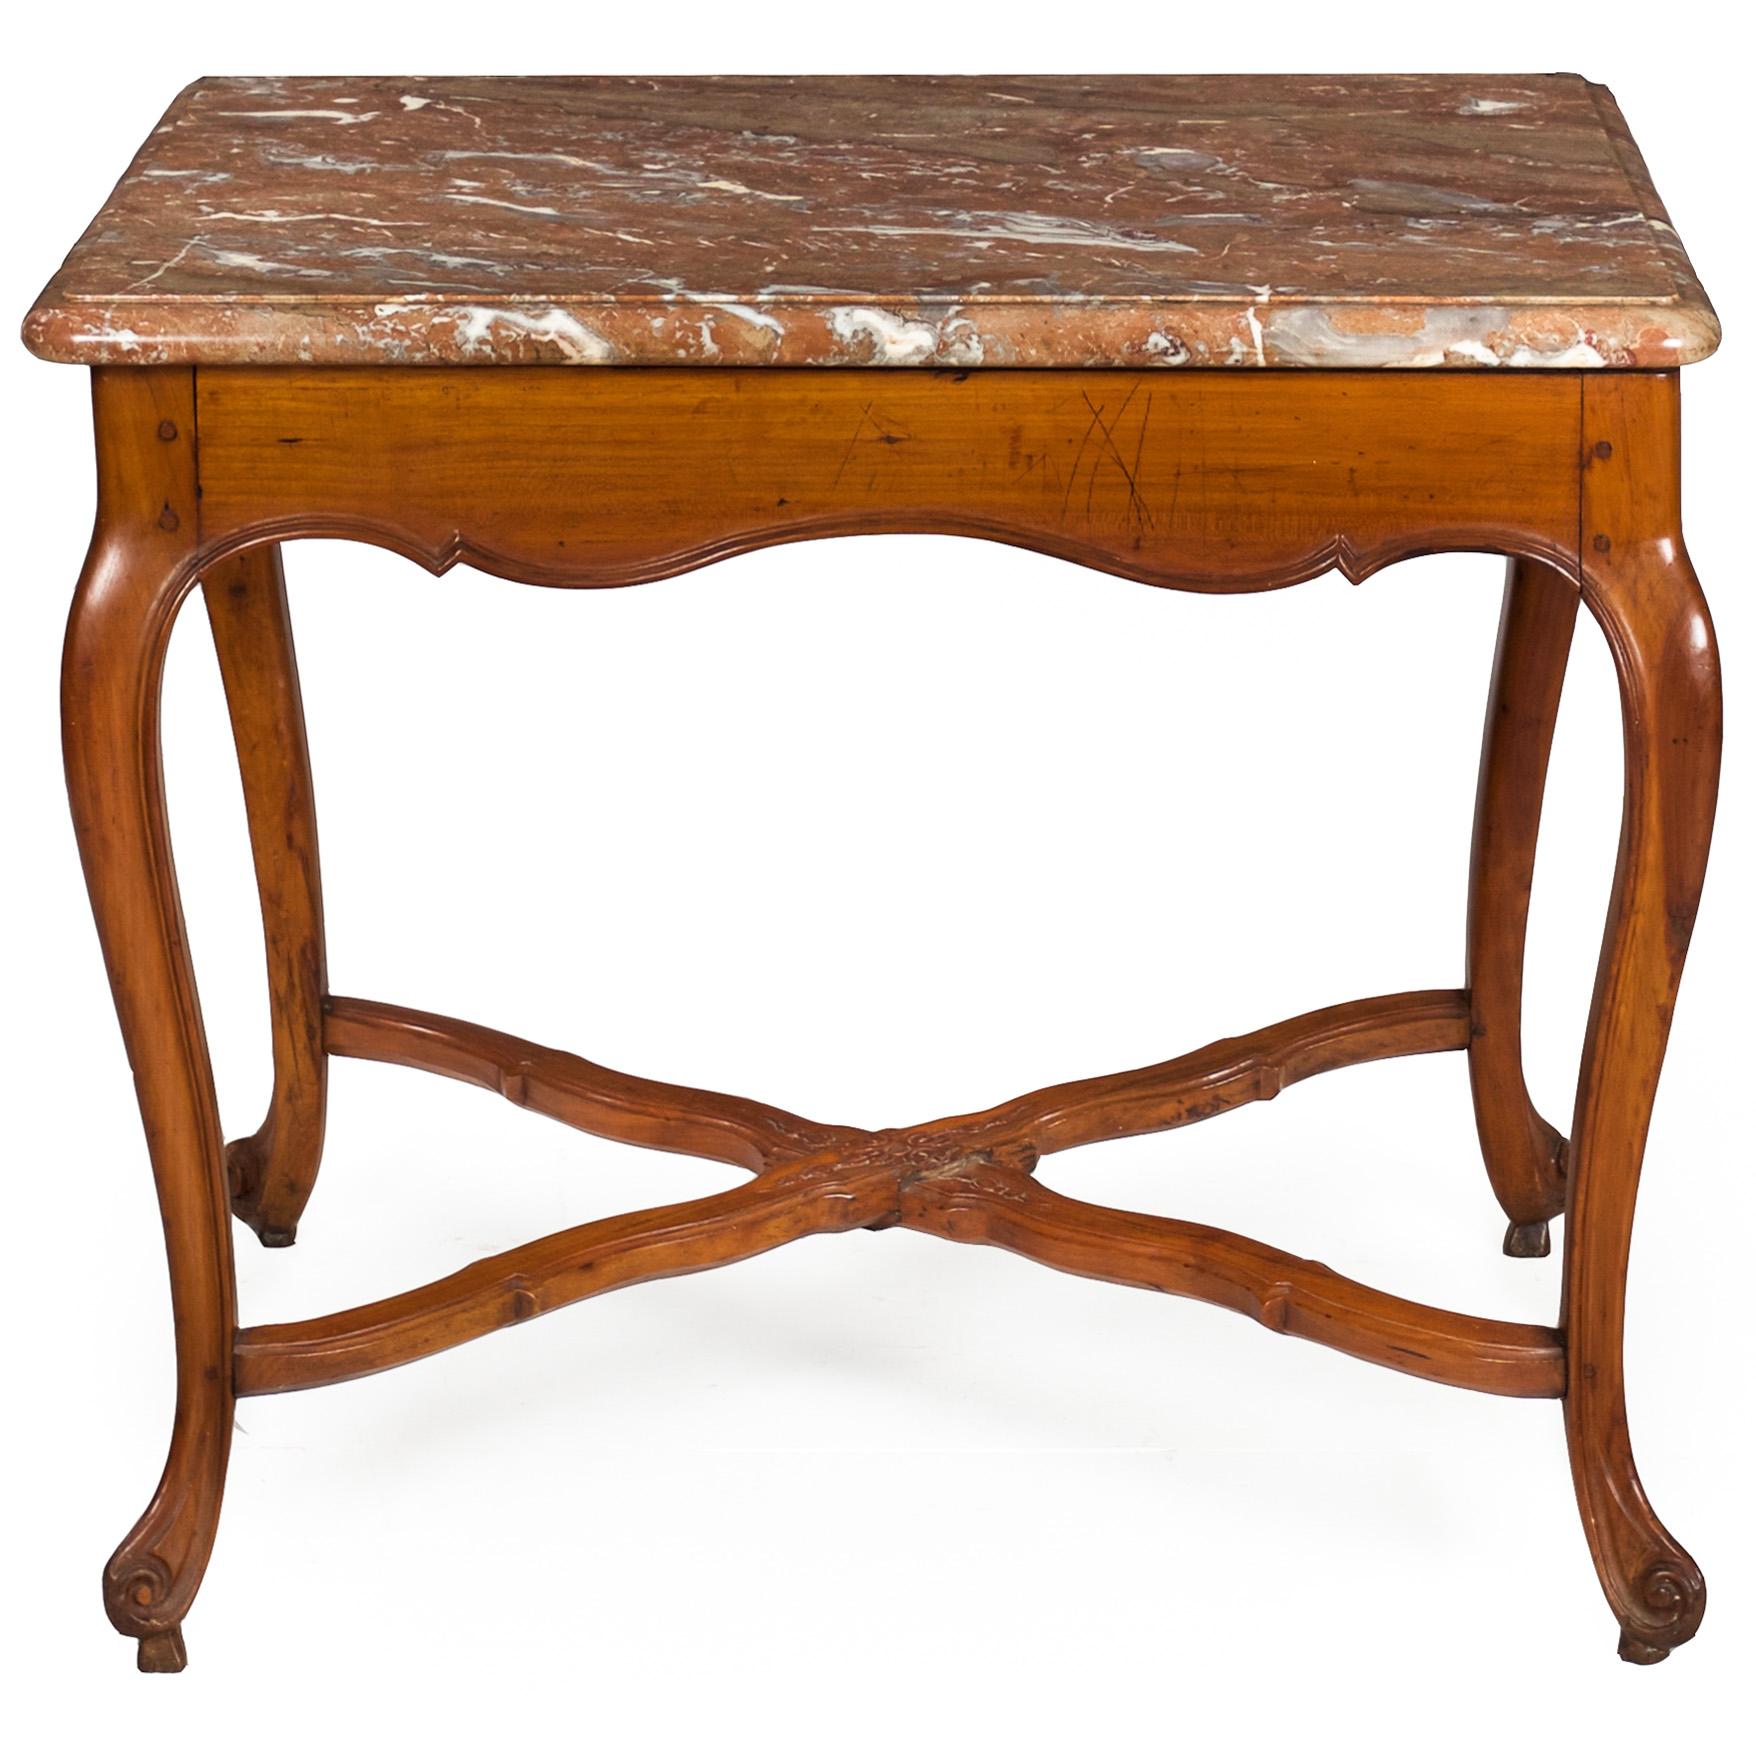 French Louis XV Period Provincial Cherry Center Table with Marble Top, 18th C In Good Condition For Sale In Shippensburg, PA